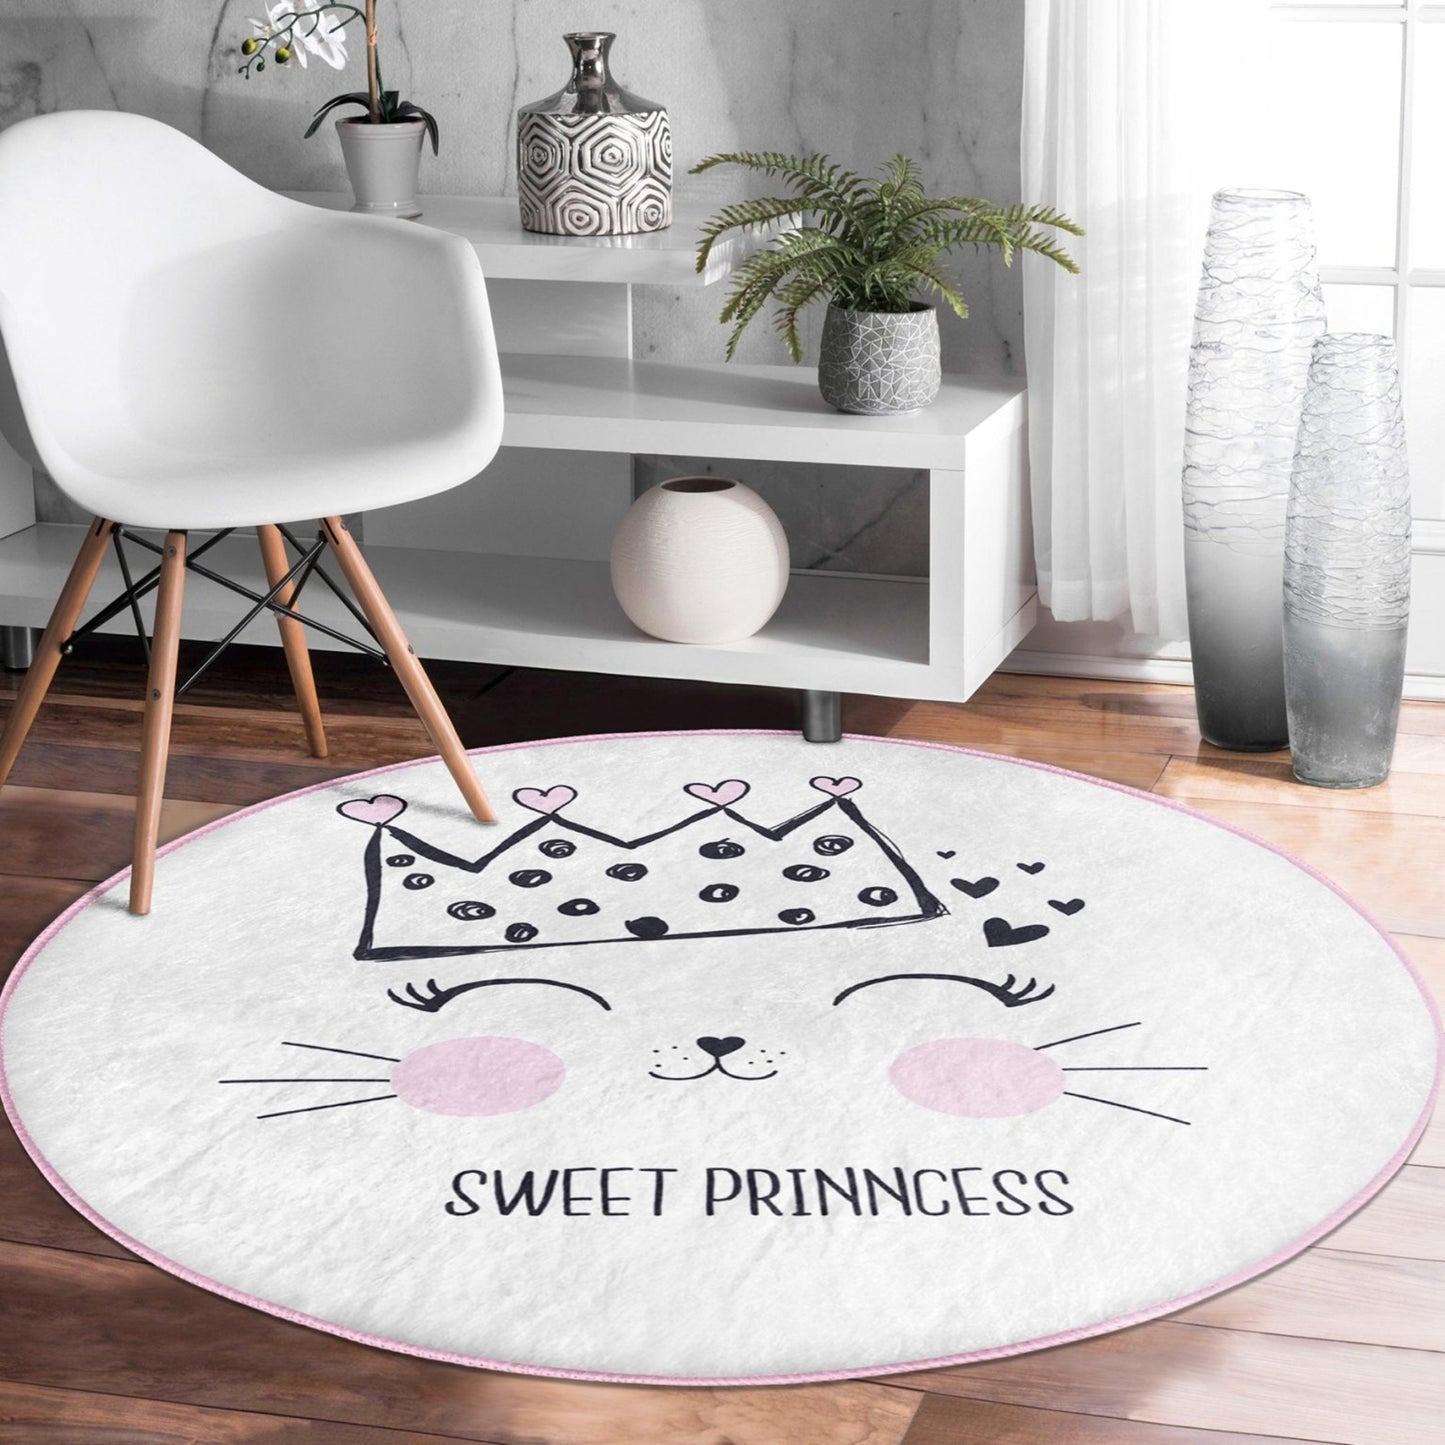 Washable Rug with Sweet Princess Cat Pattern - Easy Maintenance